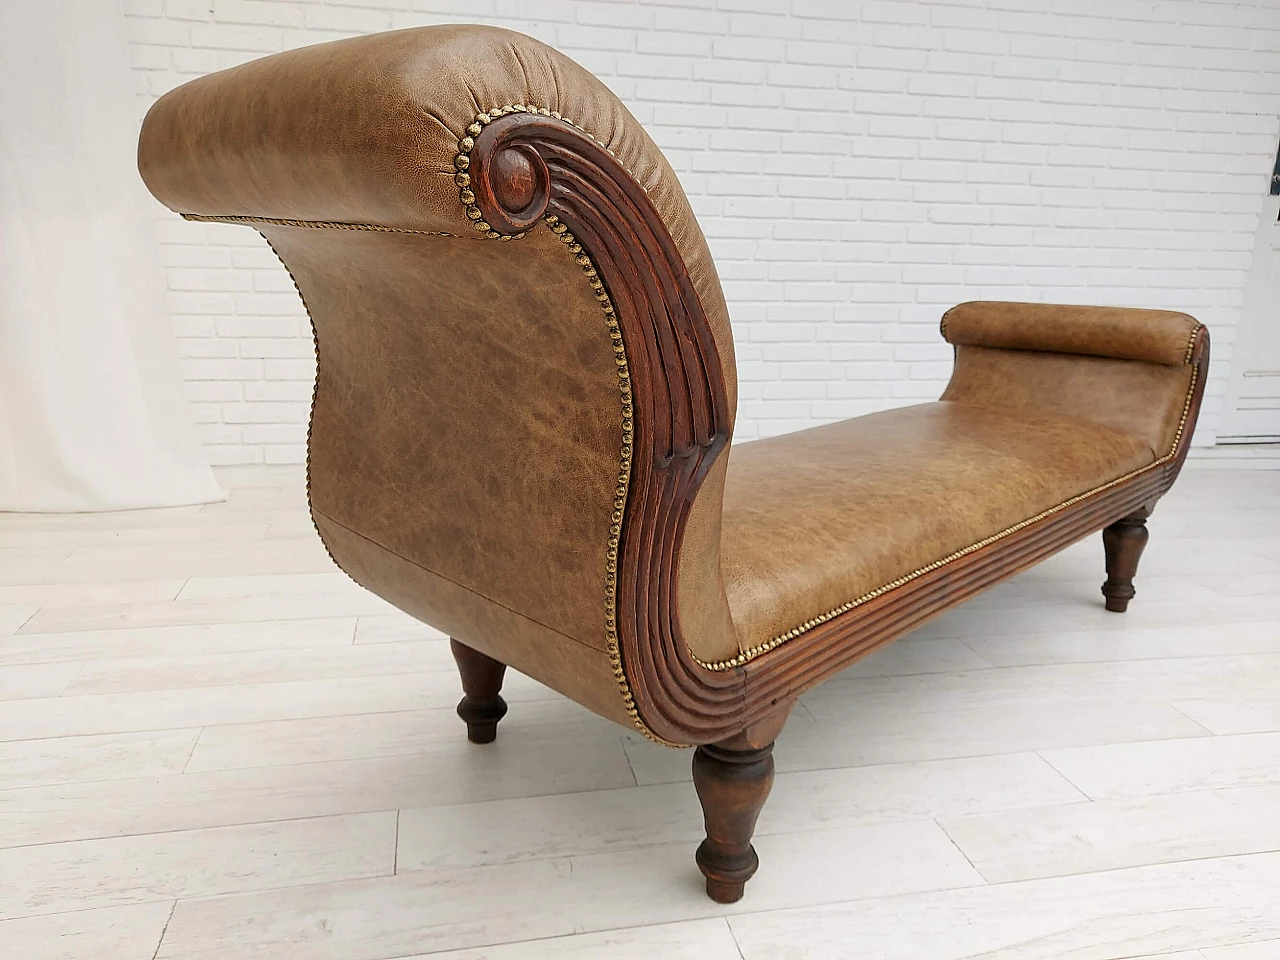 Danish antique chaise longue, early 20th century 1142176